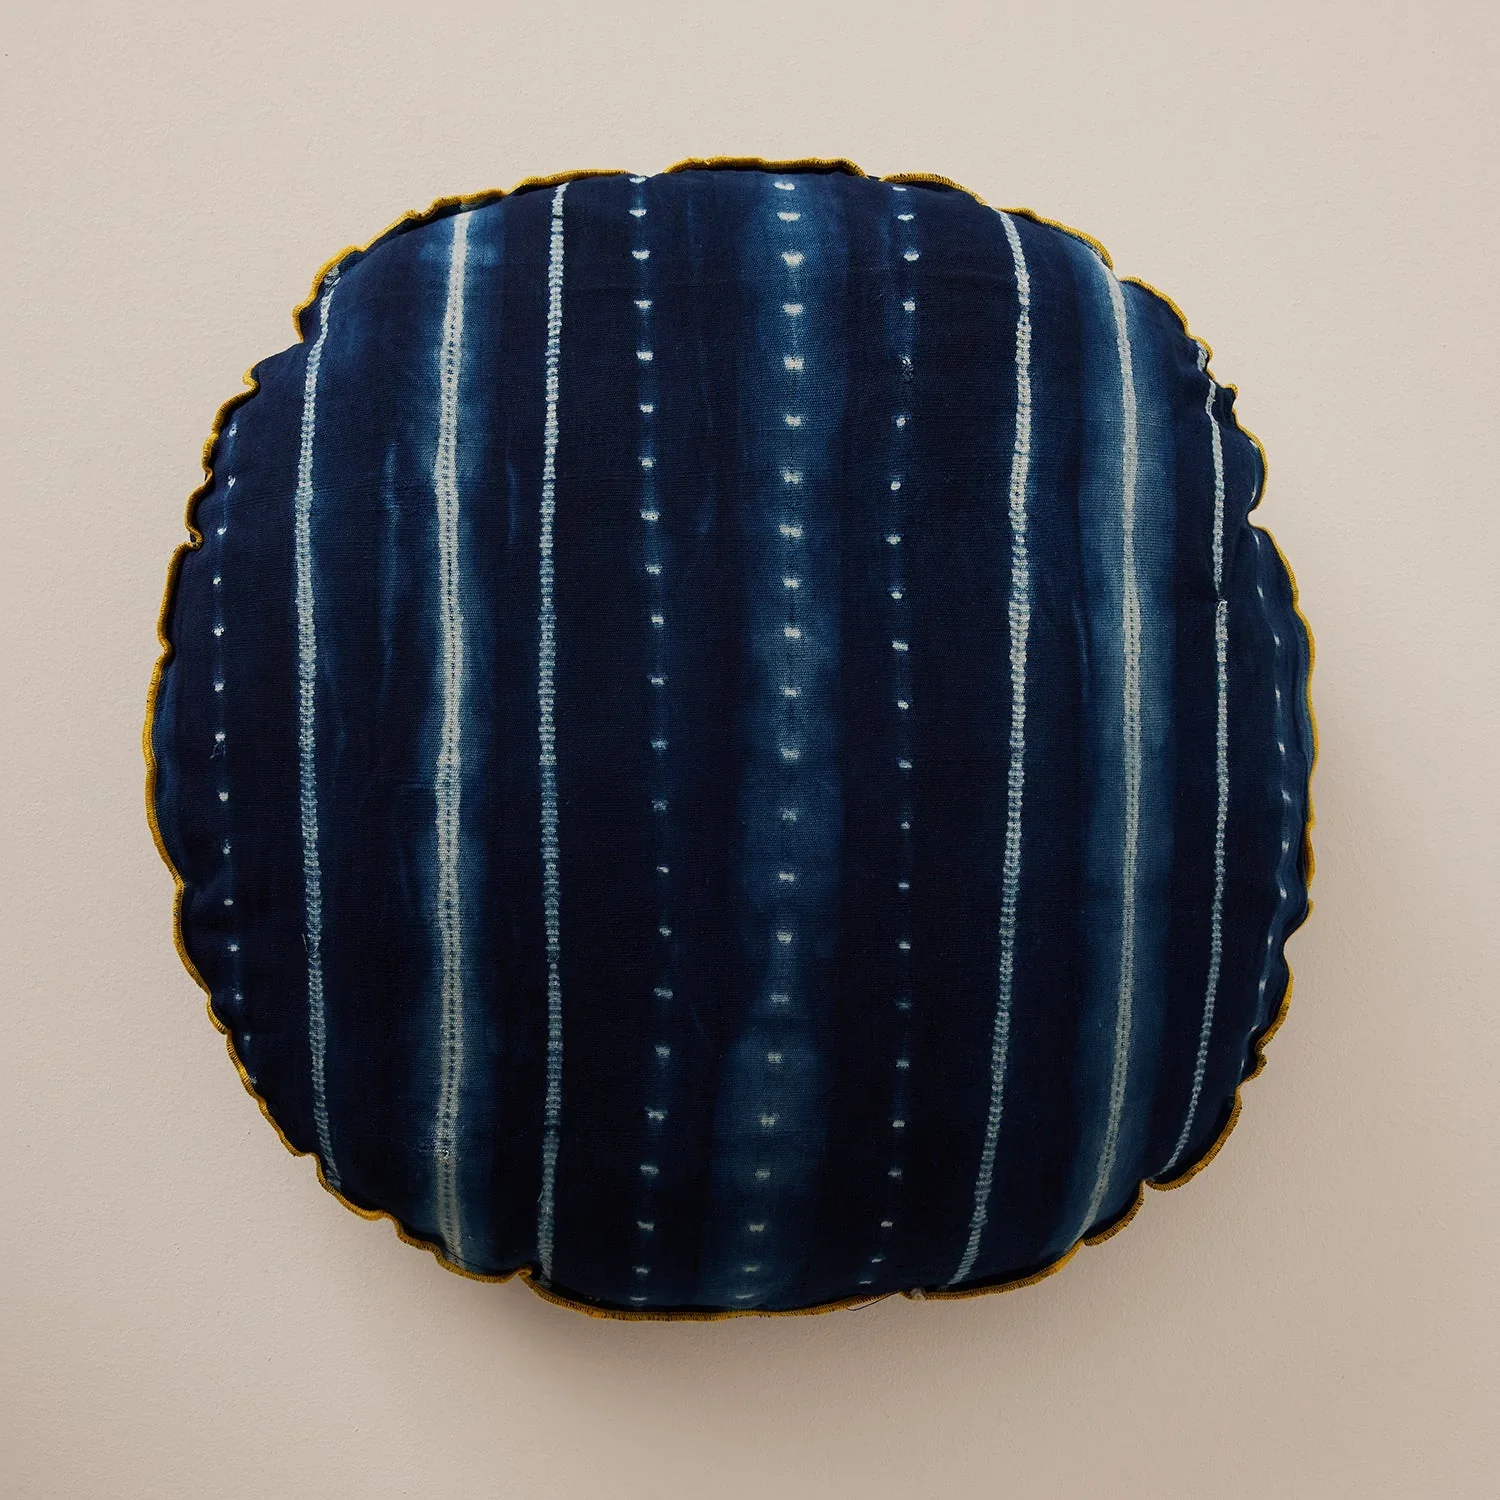 Striped midnight blue floor pillow against a cream background.